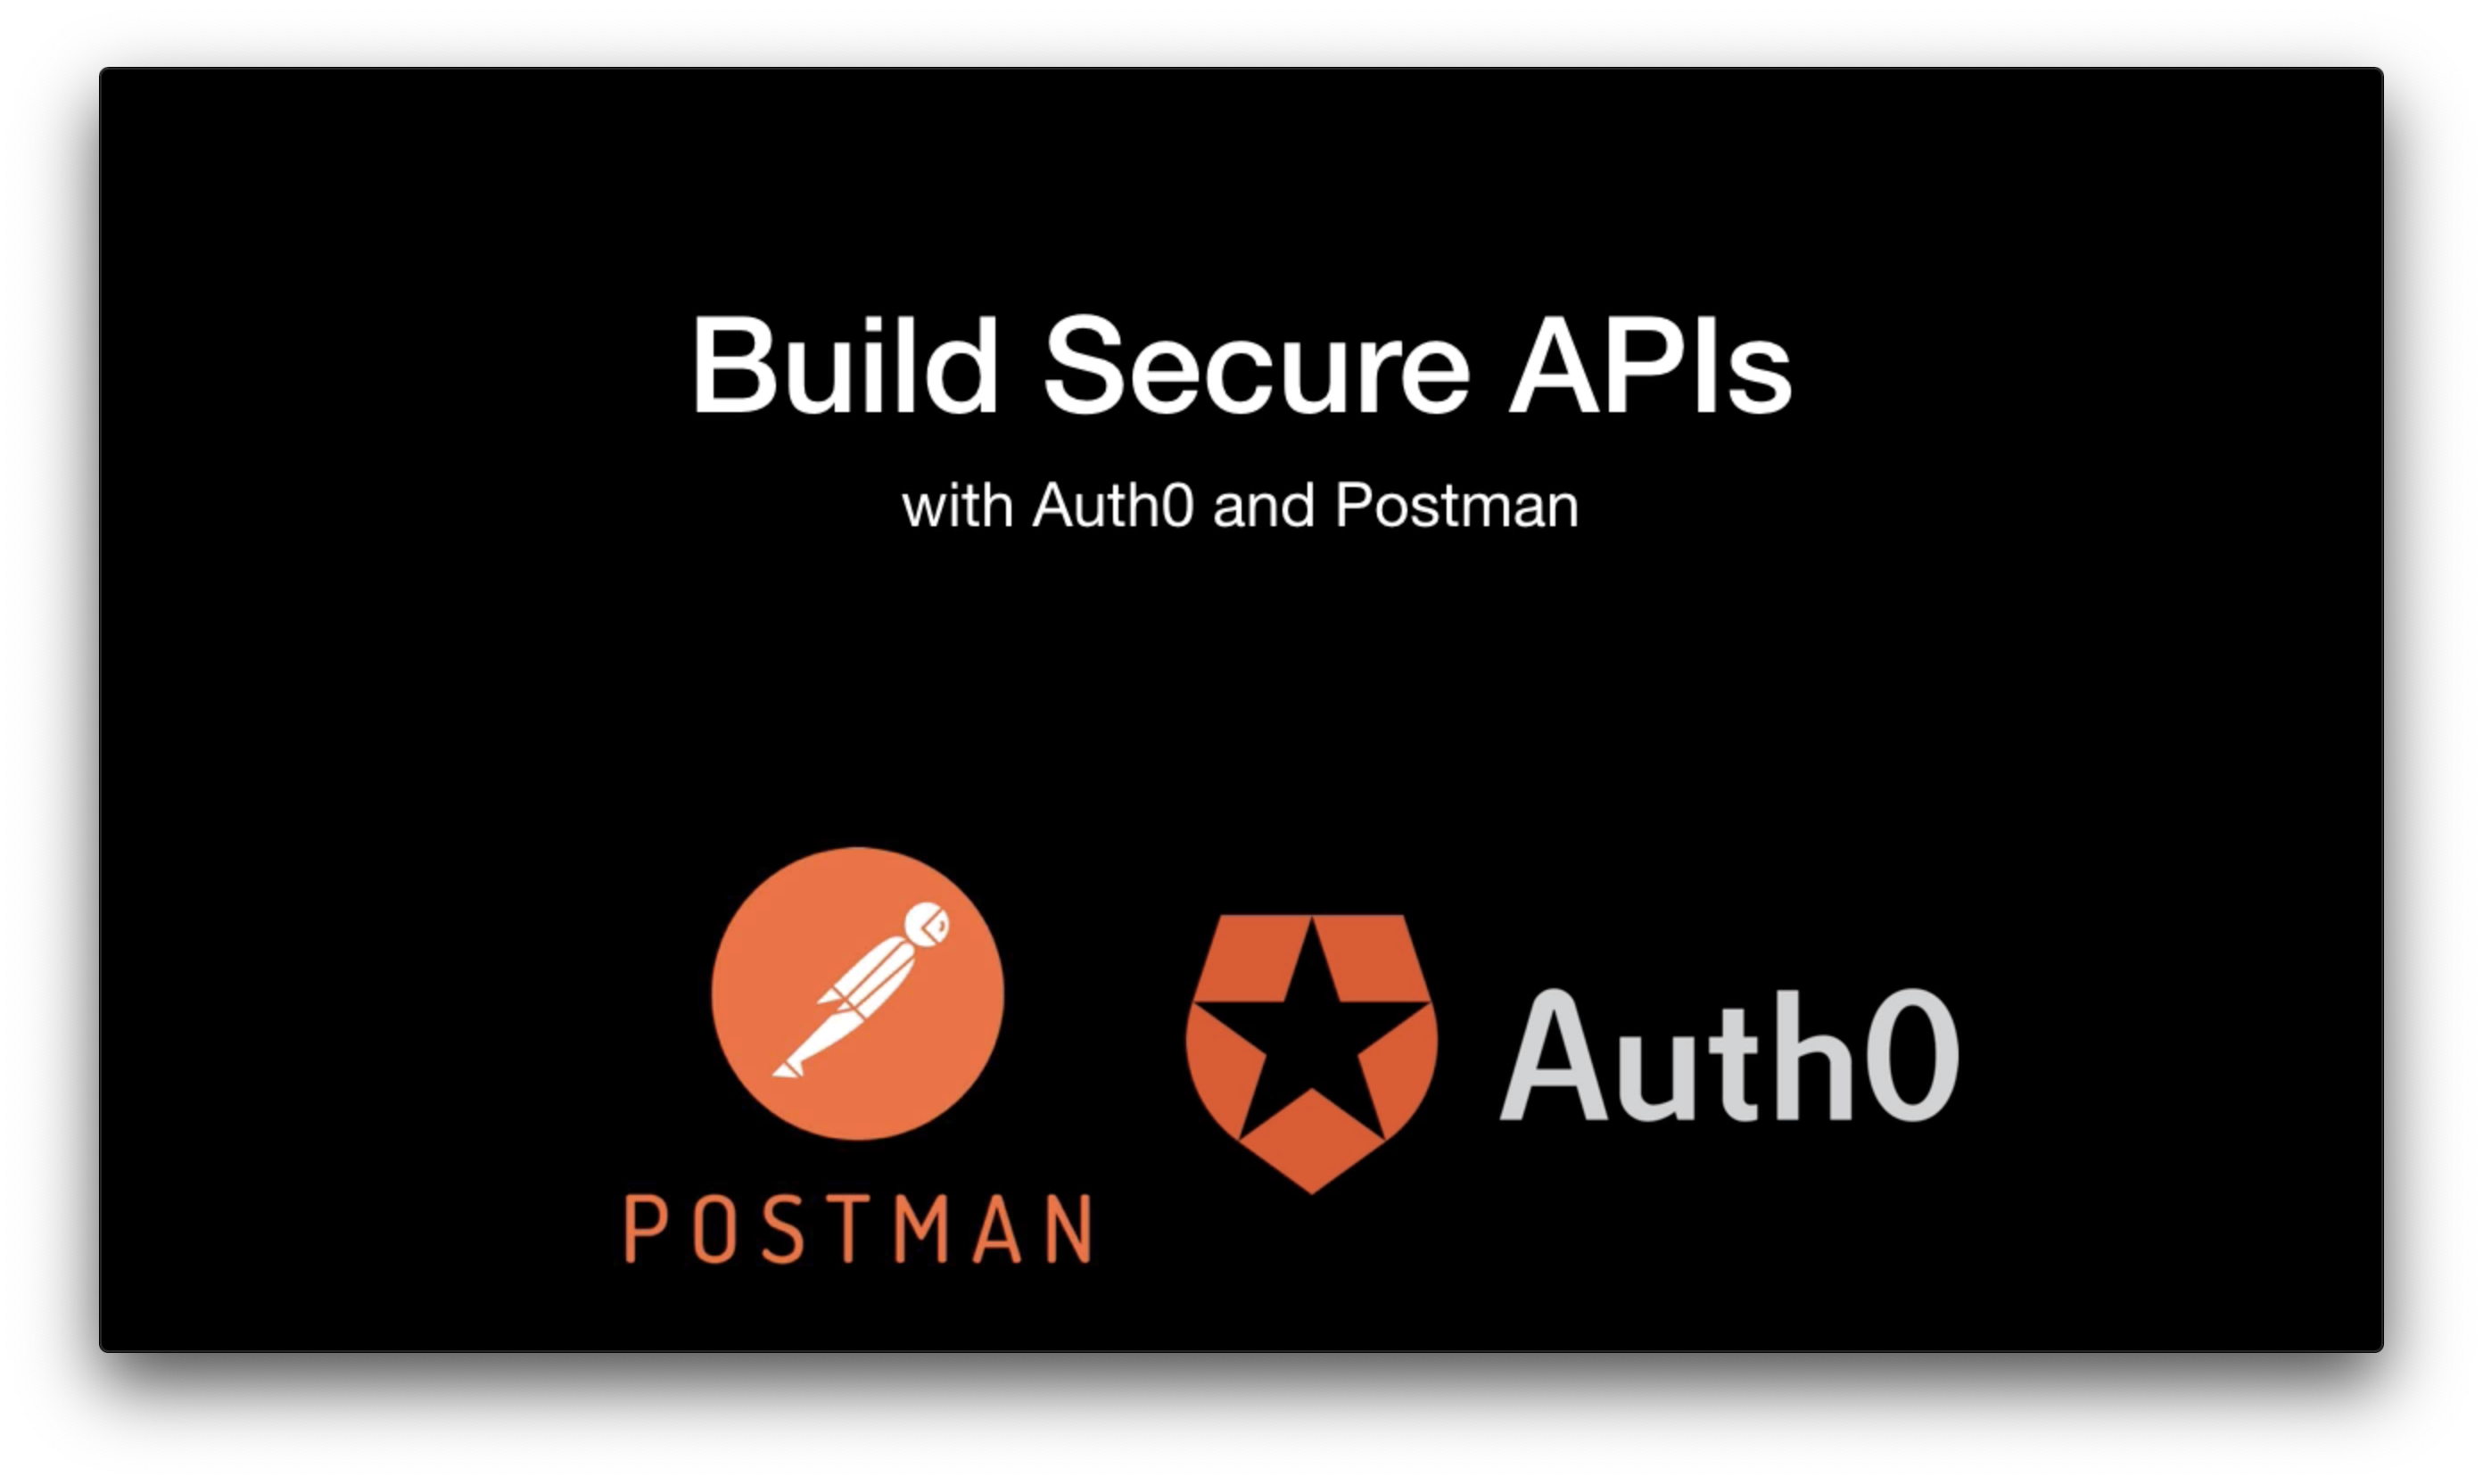 Build Secure APIs With Auth0 and Postman